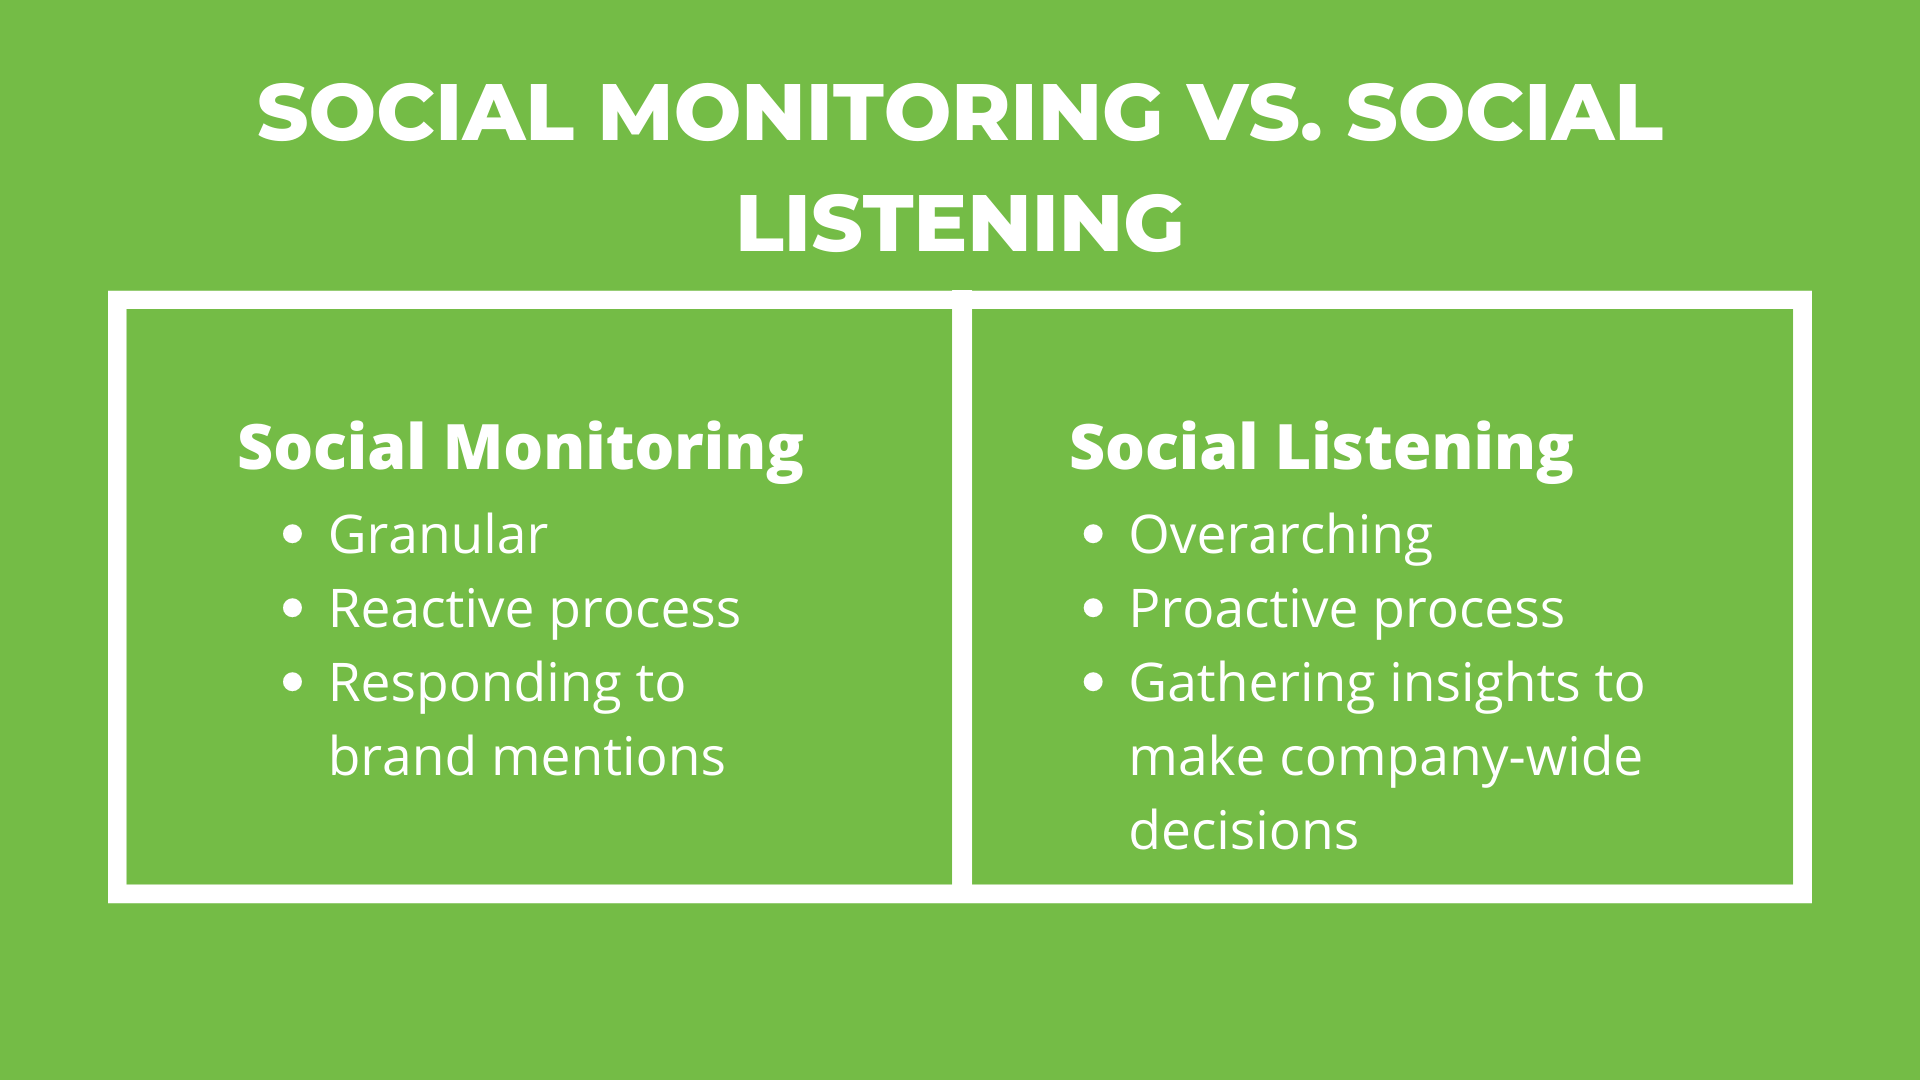 T-chart comparing social monitoring vs. social listening with a green background and white text